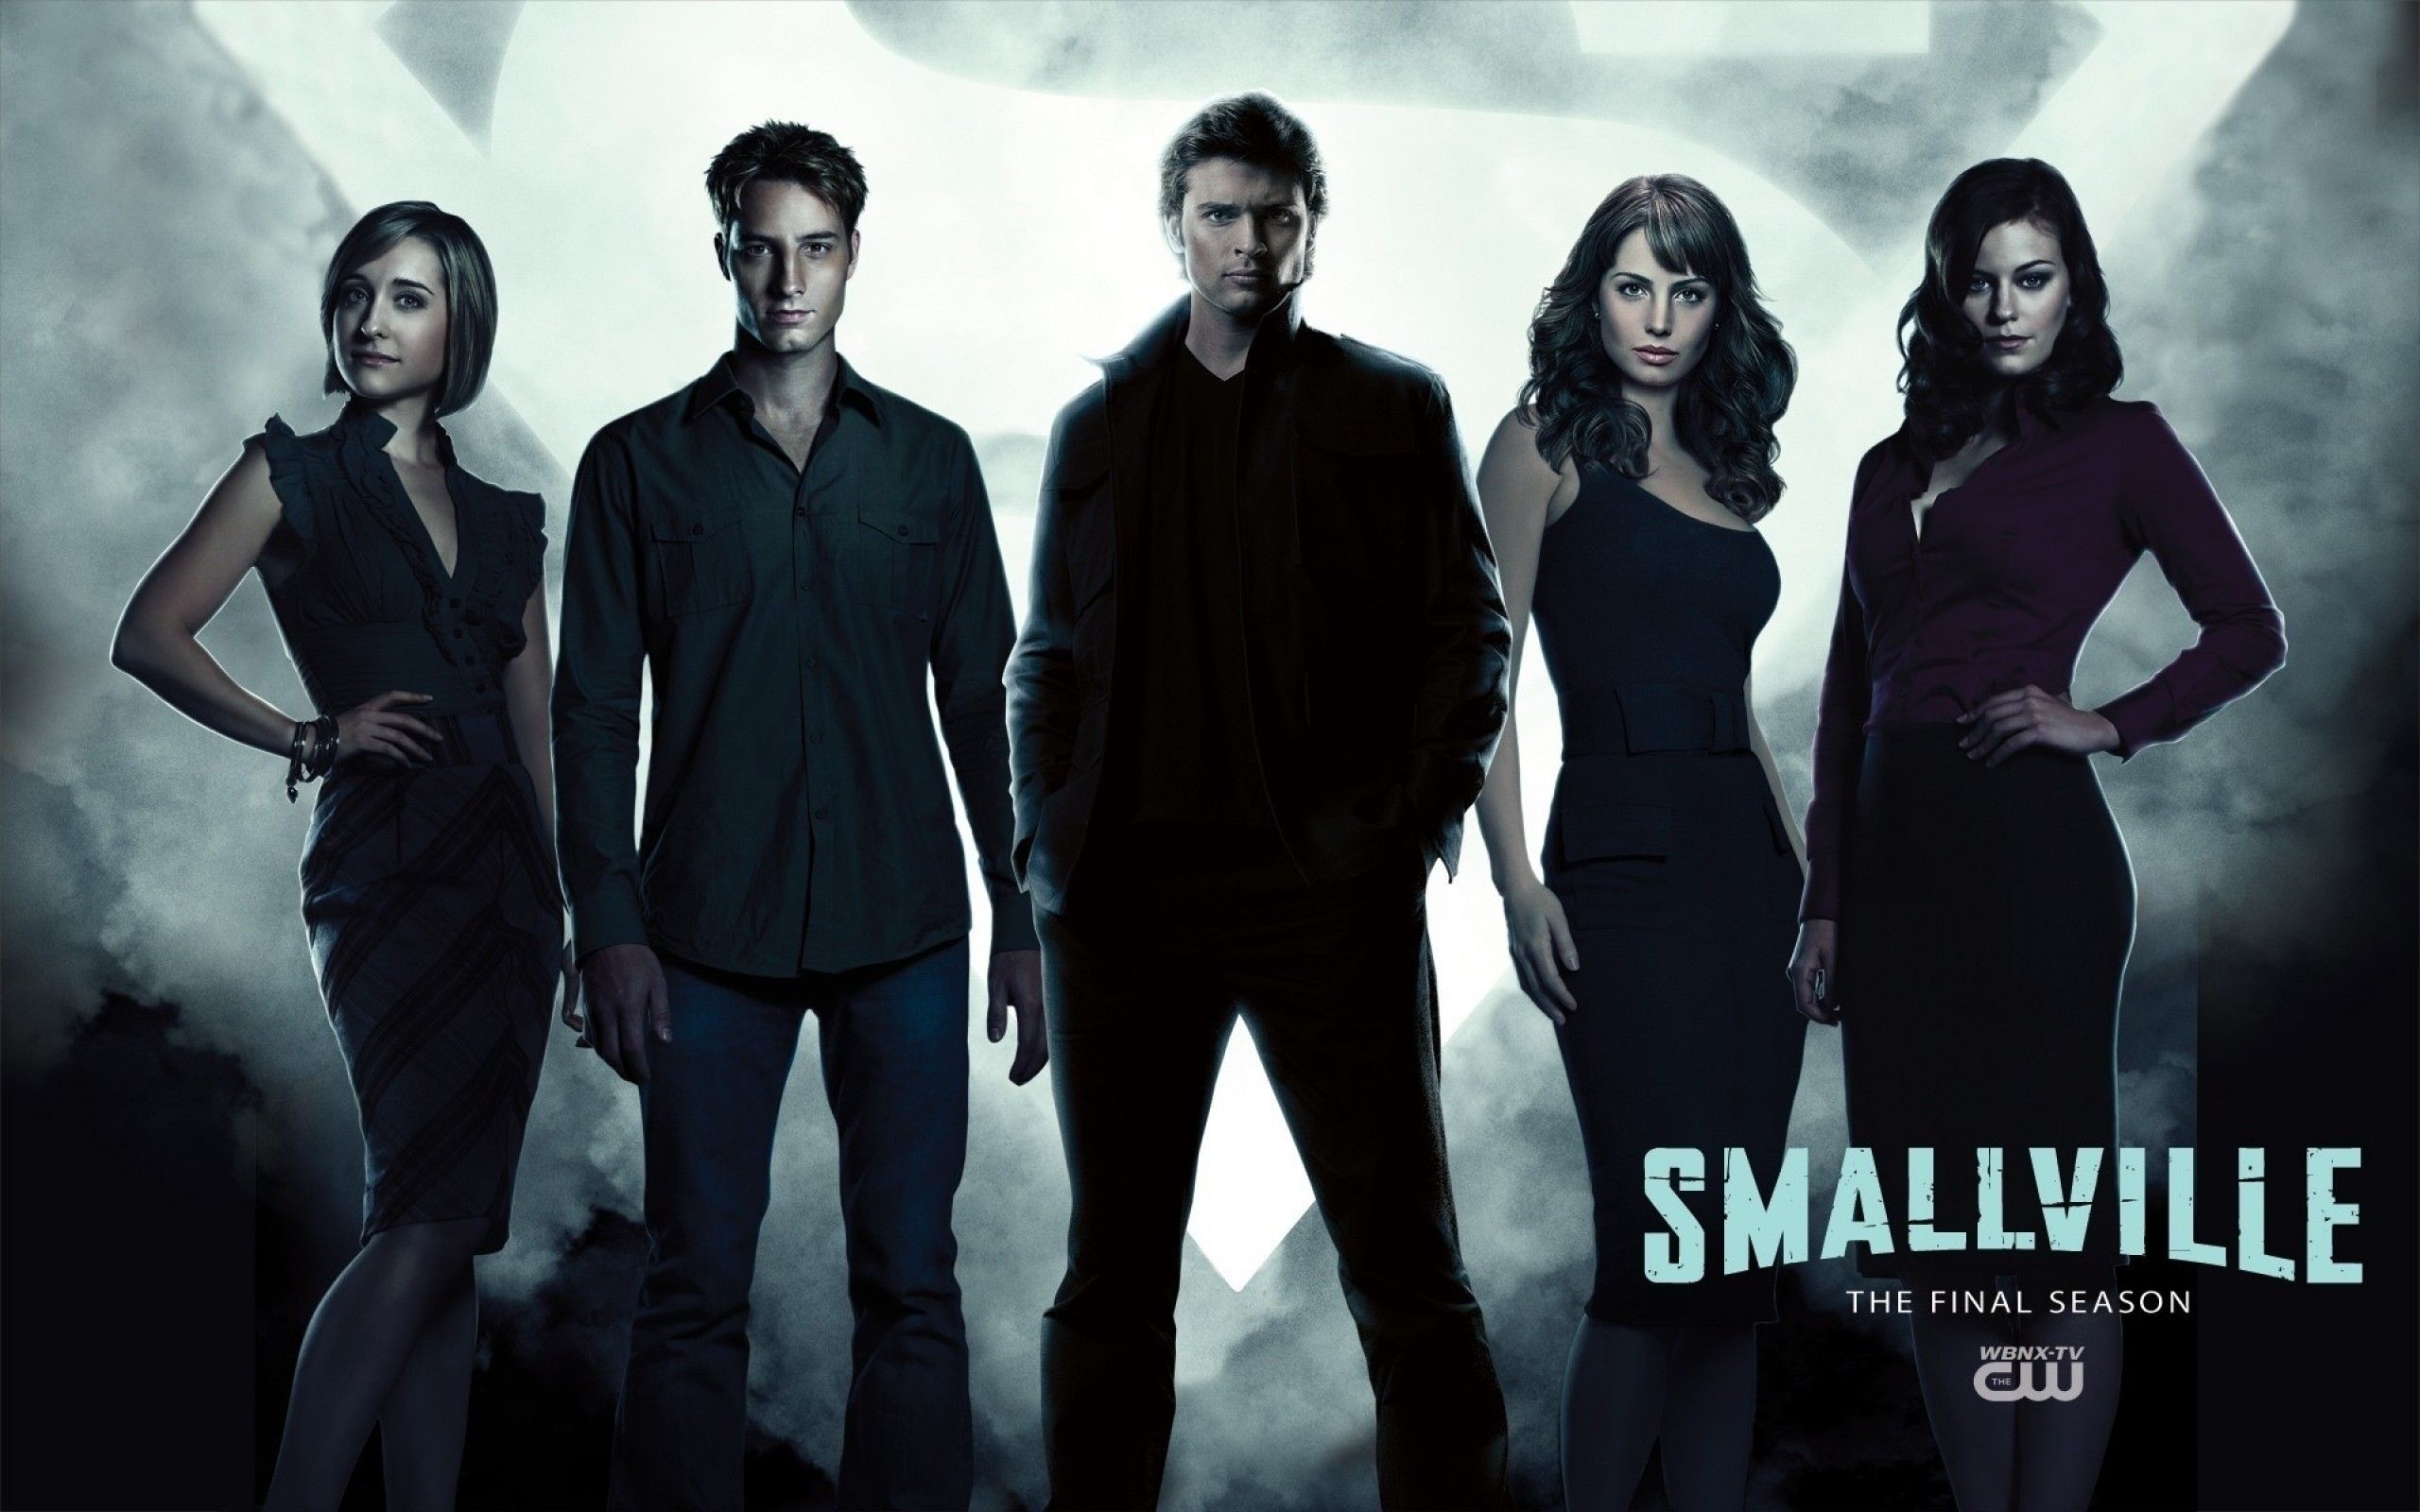 Smallville (TV Series): The tenth and final season of Smallville, Airing in 2010-2011, The CW television network. 2560x1600 HD Wallpaper.